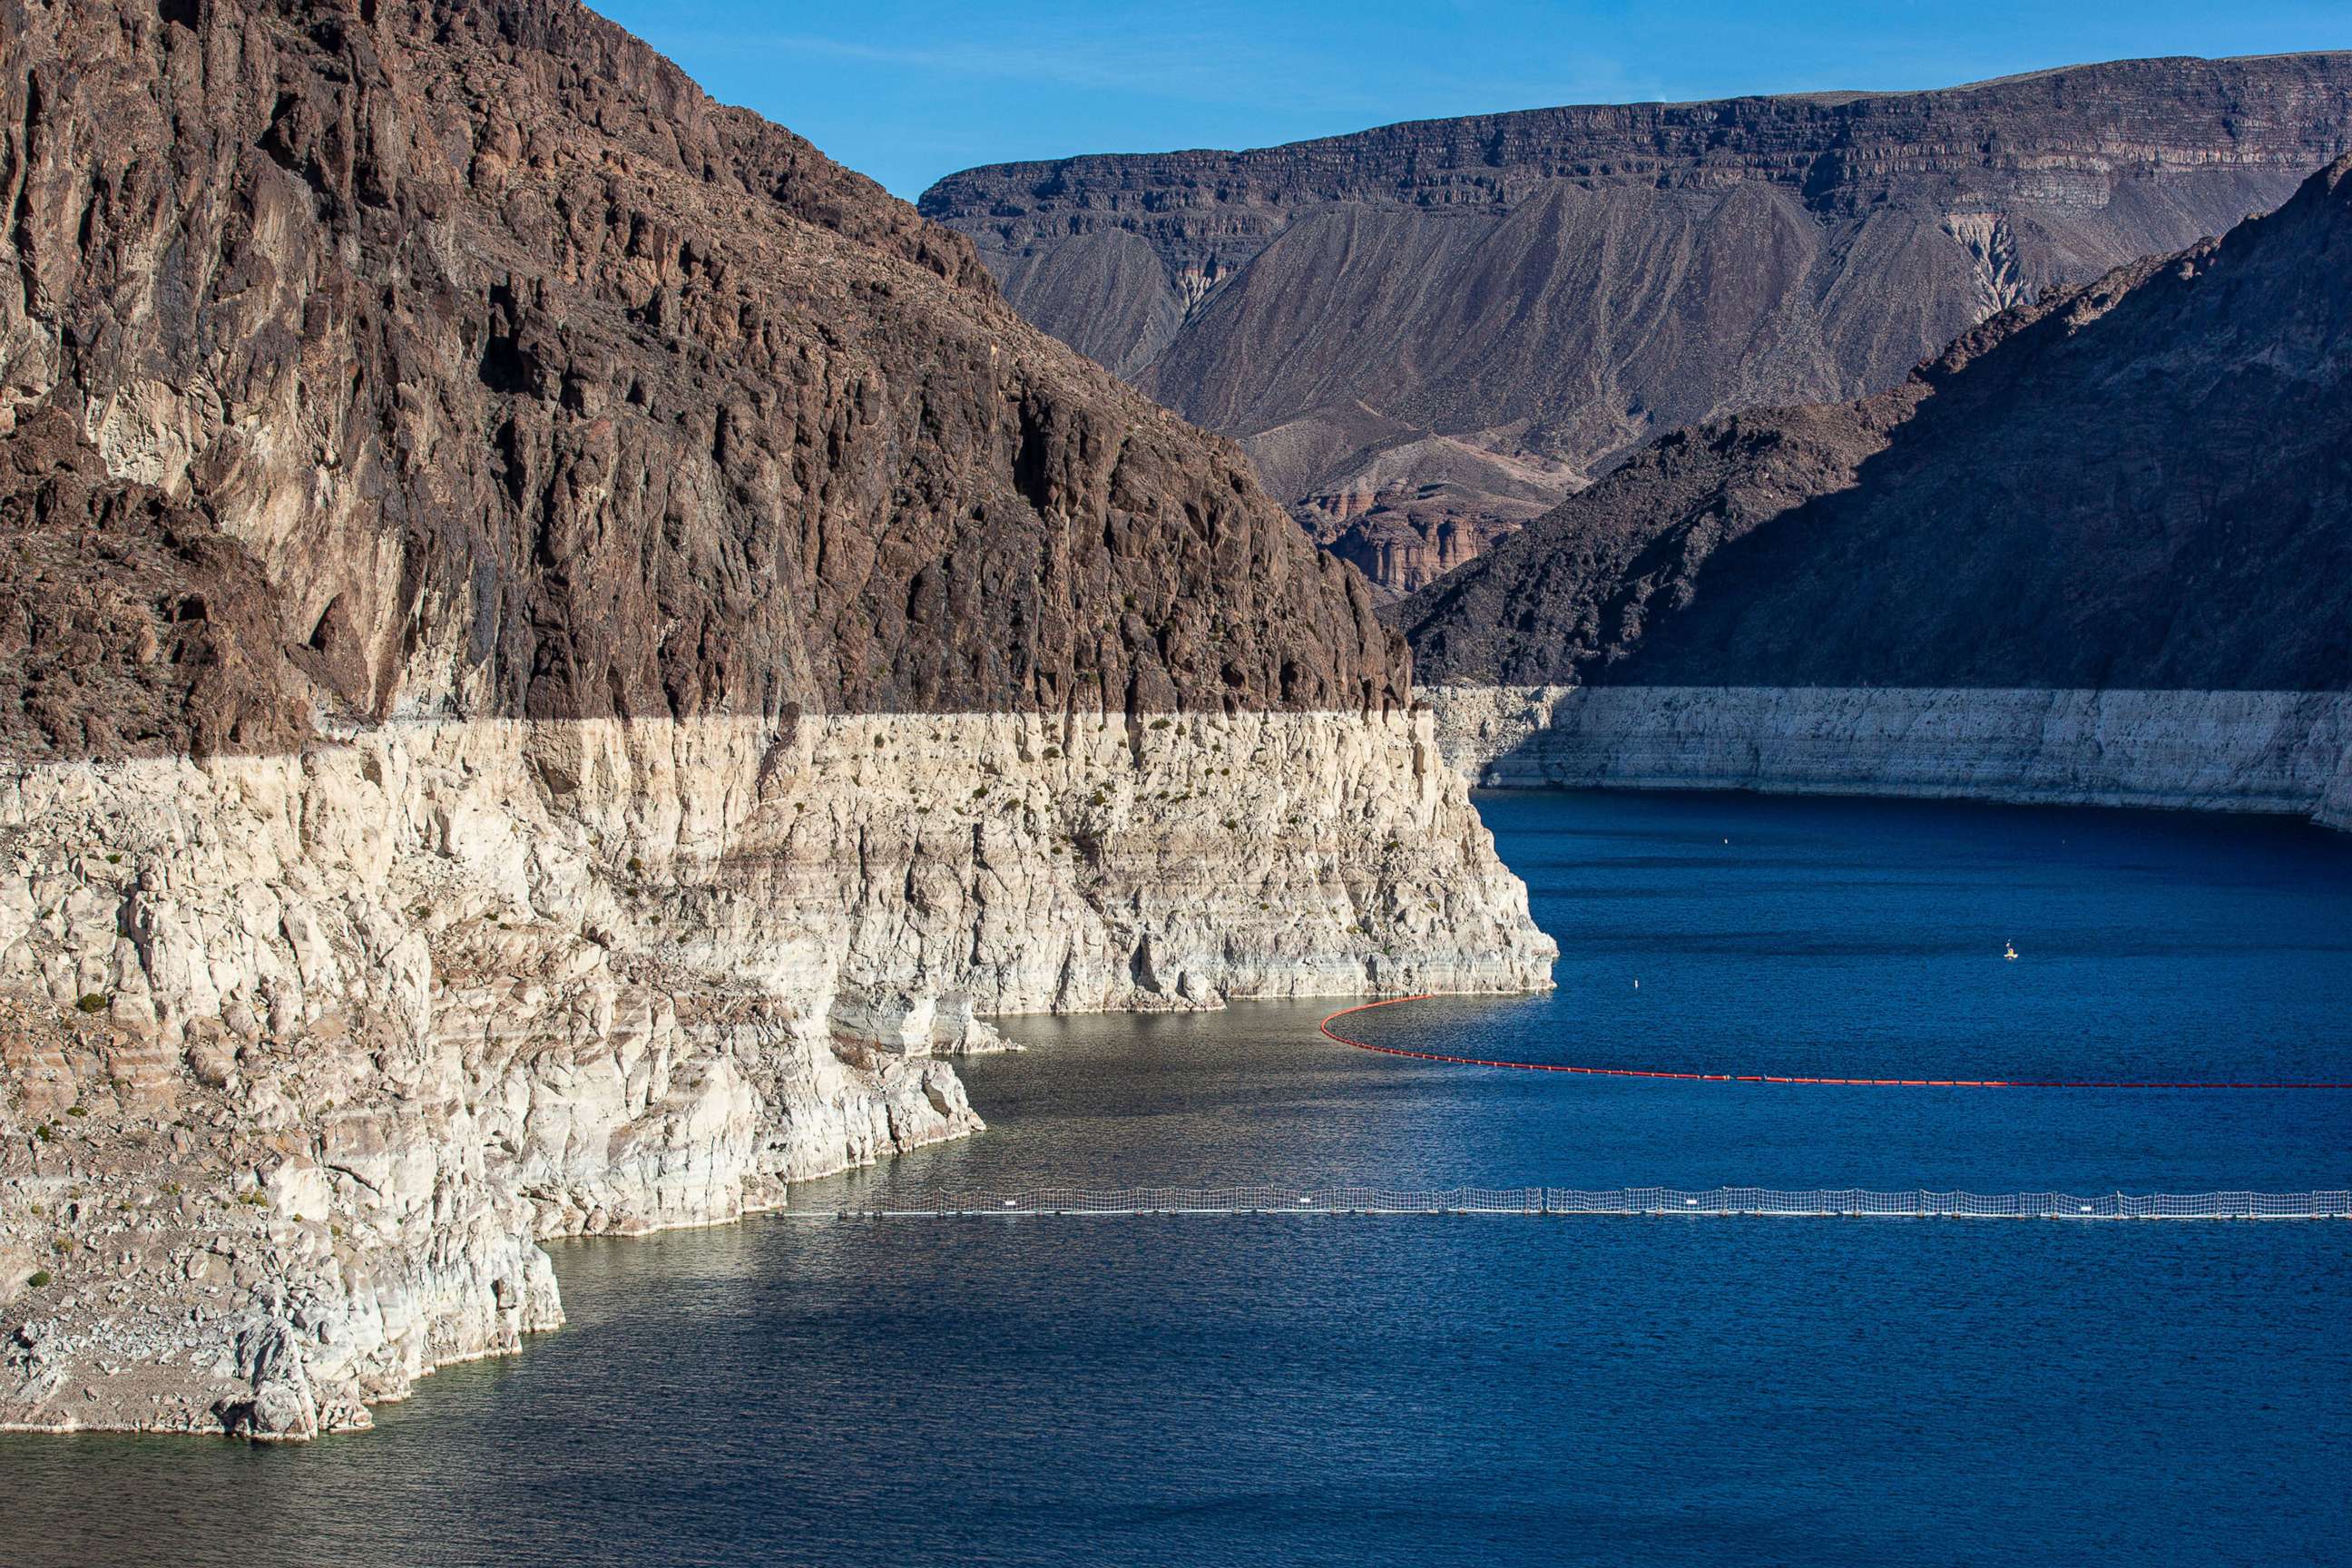 PHOTO: In this Jan. 11, 2022, file photo, a "bathtub ring" caused by the drought has formed in the canyon near the massive concrete Hoover Dam, creating Lake mead on the Colorado River, near Boulder City, Nev.